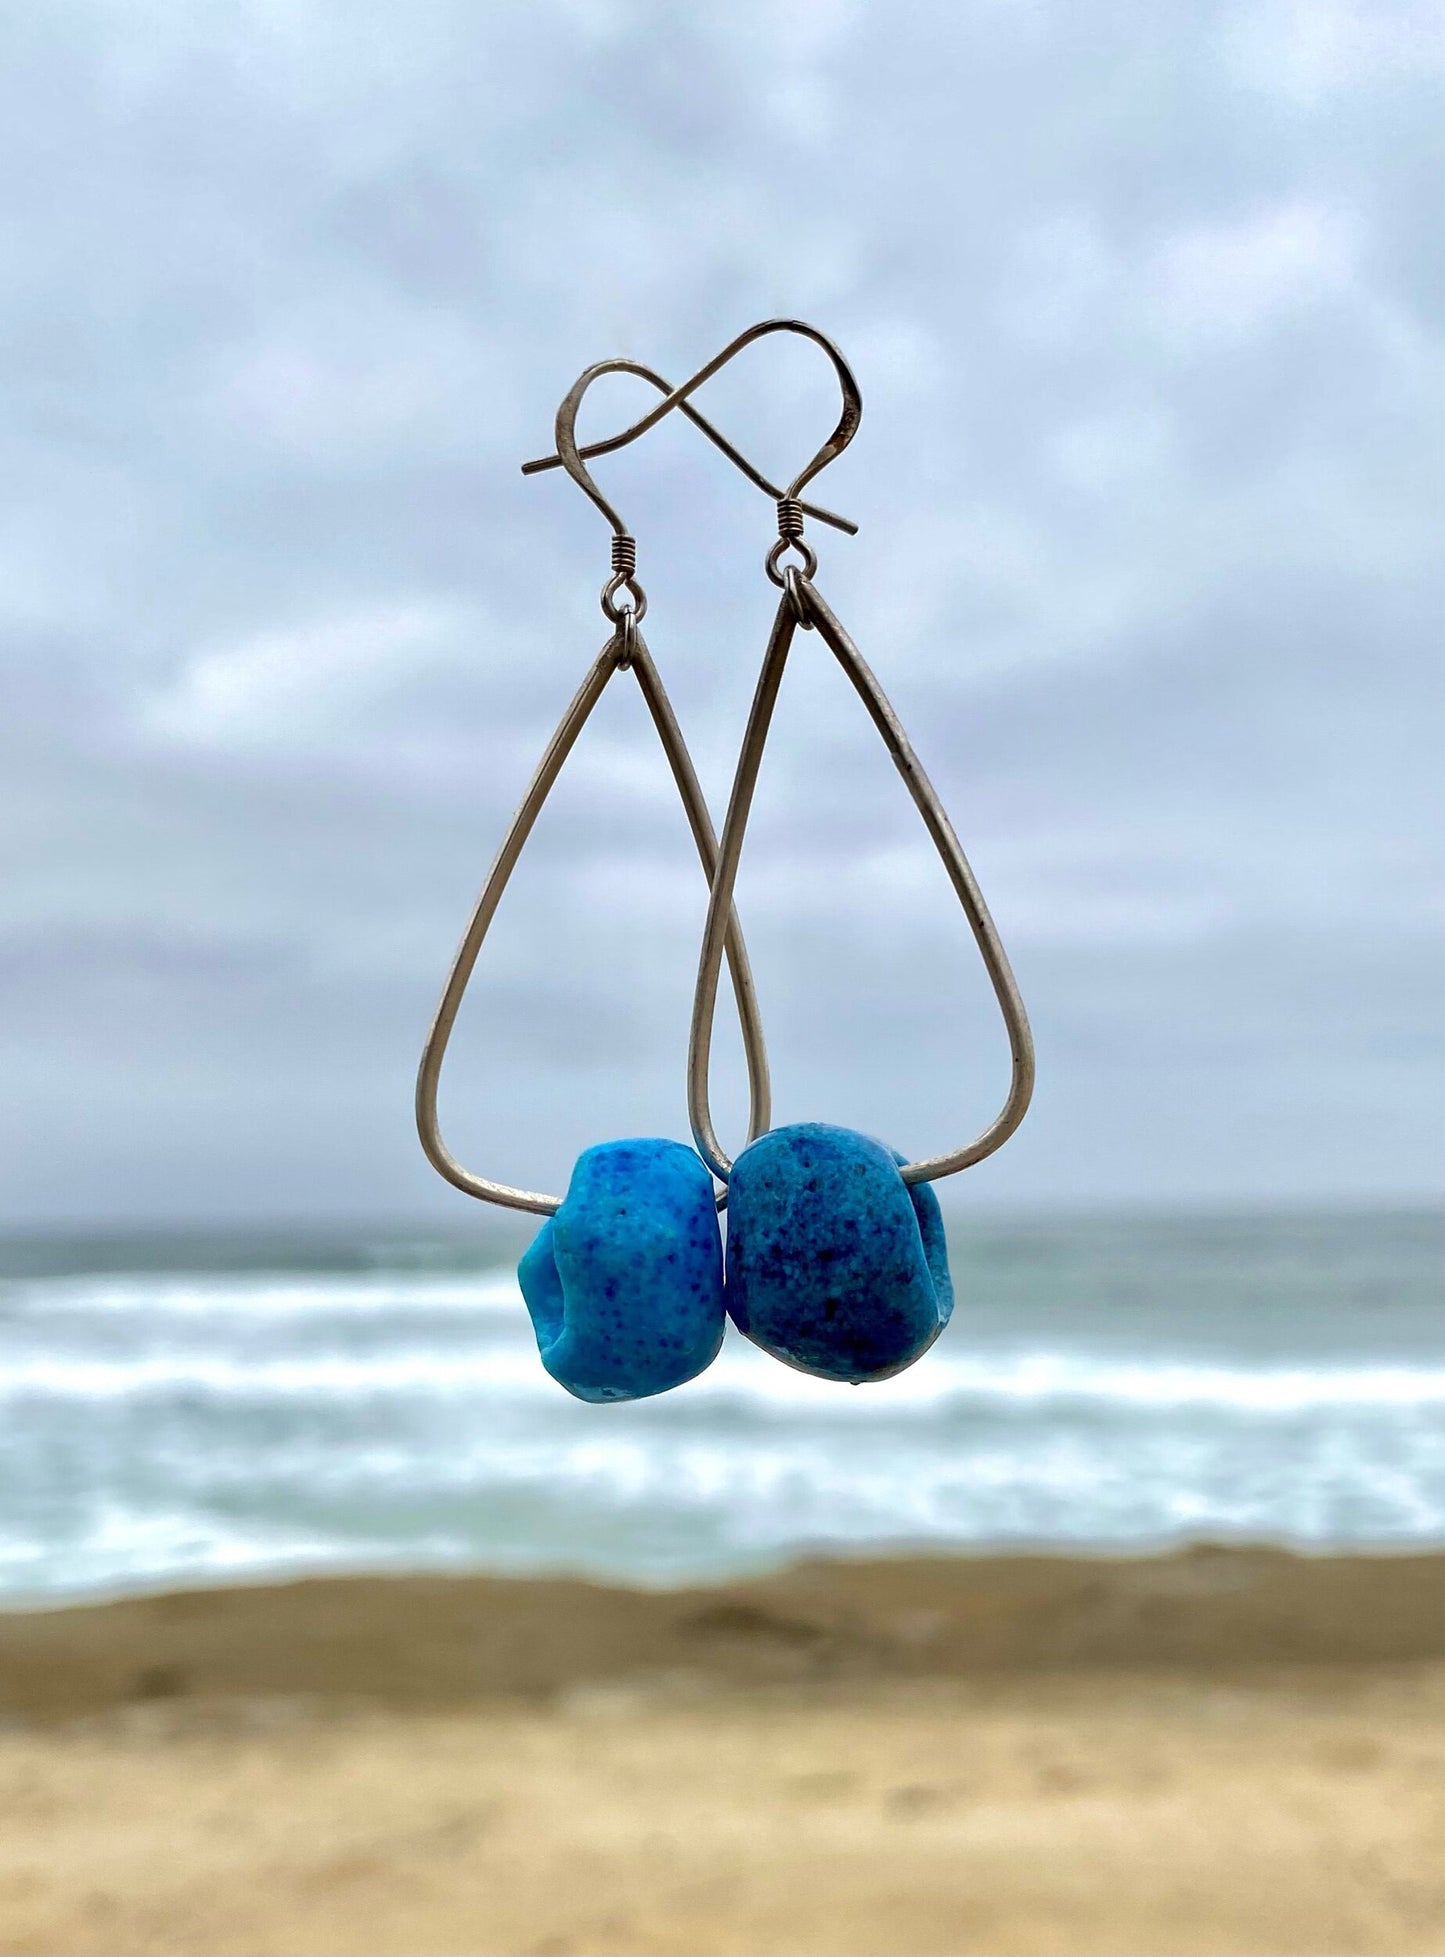 Vintage revival earrings with blue ceramic beads